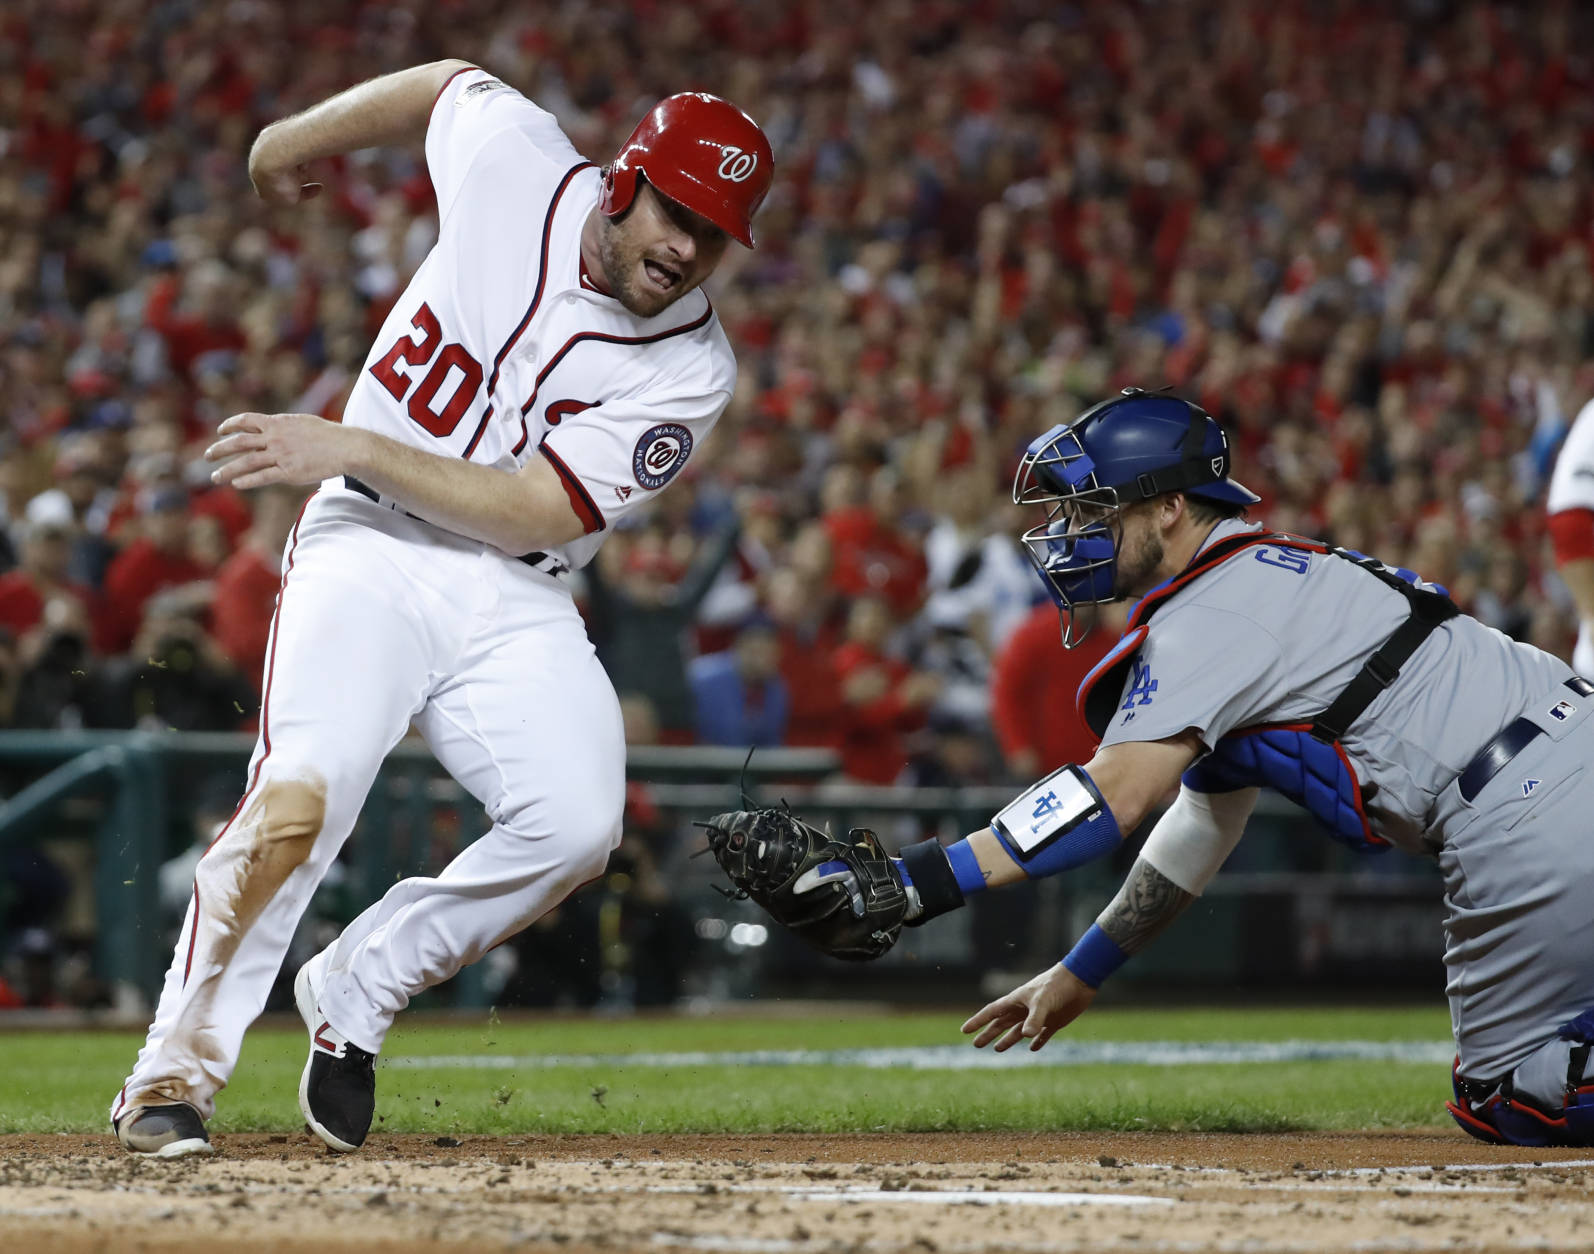 Washington Nationals' Daniel Murphy (20) runs around the tag from Los Angeles Dodgers catcher Yasmani Grandal (9) to score during the second inning in Game 5 of baseball's National League Division Series, at Nationals Park, Thursday, Oct. 13, 2016, in Washington. (AP Photo/Alex Brandon)